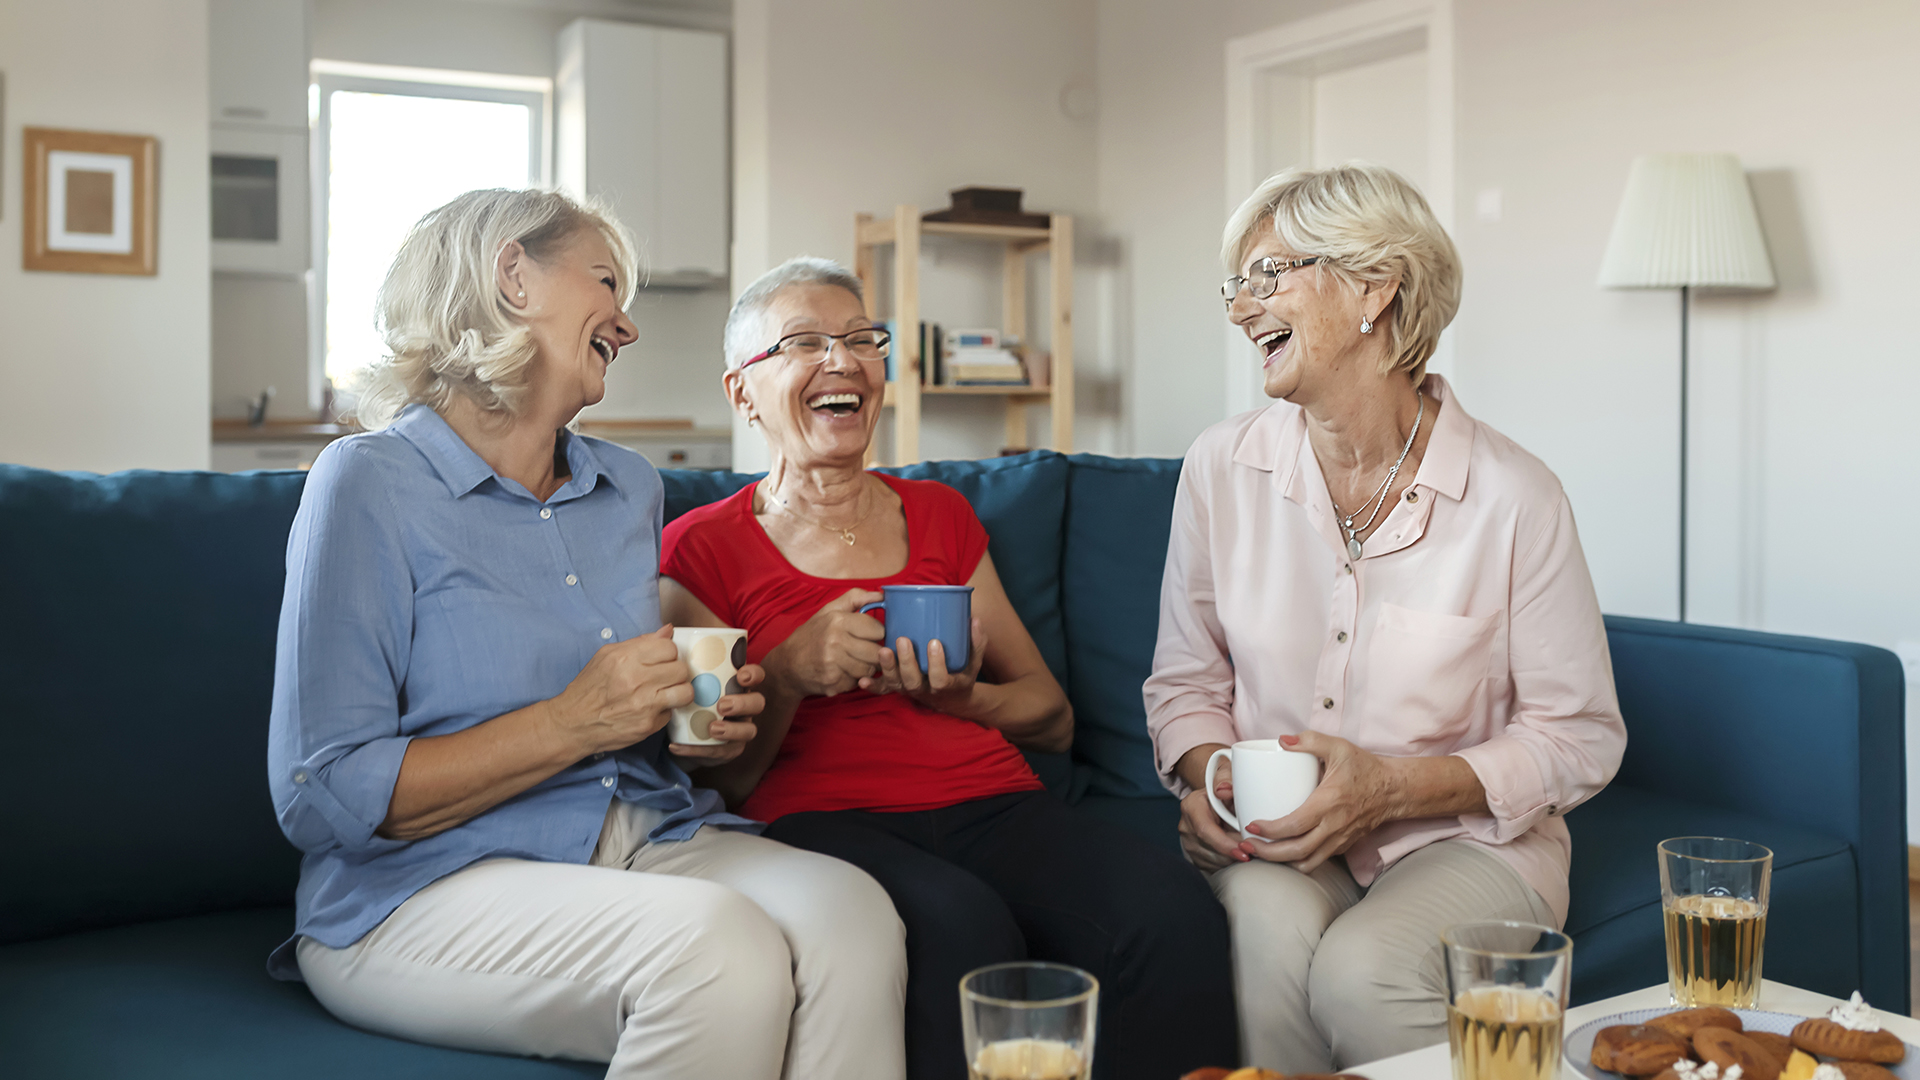 Three Female Seniors Drinking Coffee and Having Fun in the Living Room. Group of an Elderly Women Having Fun Talking and Laughing While Sitting on Sofa at Home